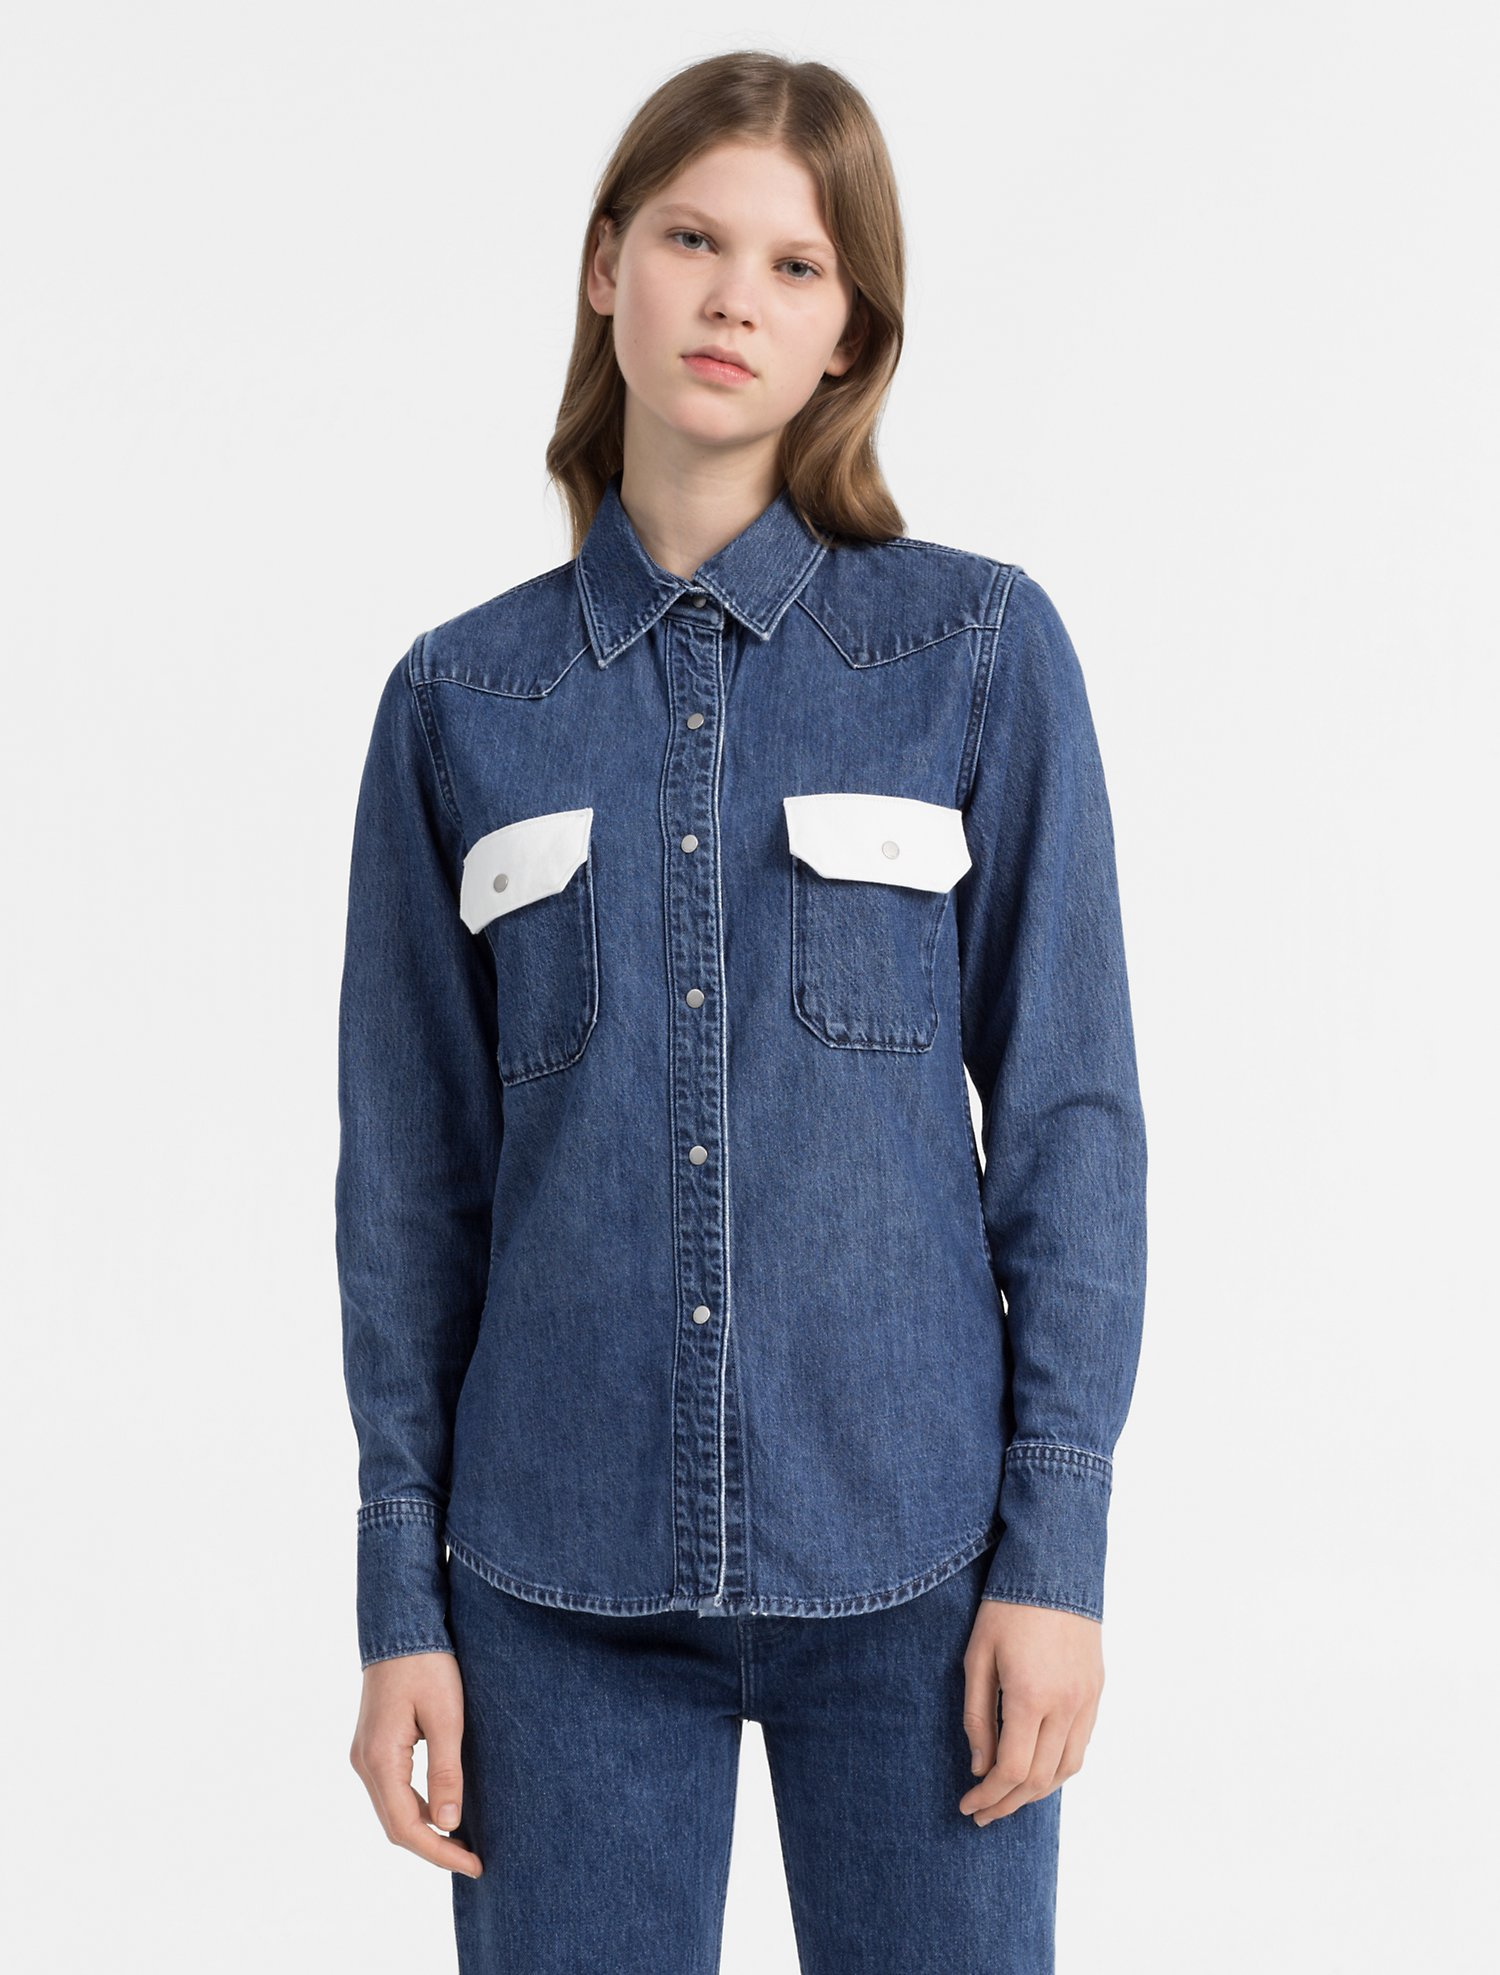 unexpected denim pieces you’ll want to add to your fall wardrobe